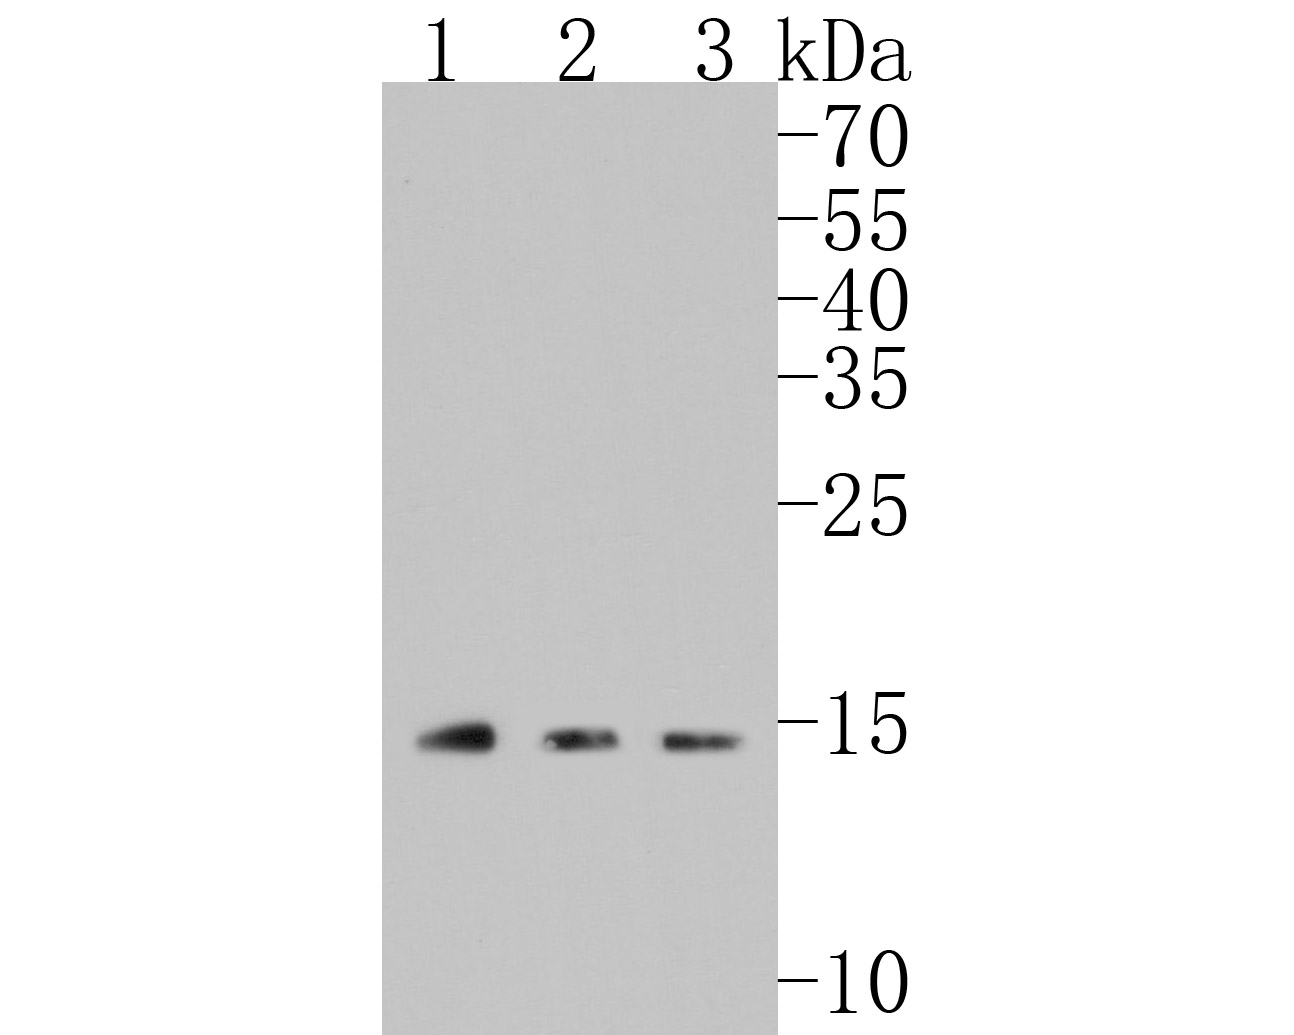 Western blot analysis of SCGB1A1 on different lysates. Proteins were transferred to a PVDF membrane and blocked with 5% BSA in PBS for 1 hour at room temperature. The primary antibody (ET7106-71, 1/500) was used in 5% BSA at room temperature for 2 hours. Goat Anti-Rabbit IgG - HRP Secondary Antibody (HA1001) at 1:5,000 dilution was used for 1 hour at room temperature.<br />
Positive control: <br />
Lane 1: mouse lung tissue lysate<br />
Lane 2: human lung tissue lysate<br />
Lane 3: A549 cell lysate